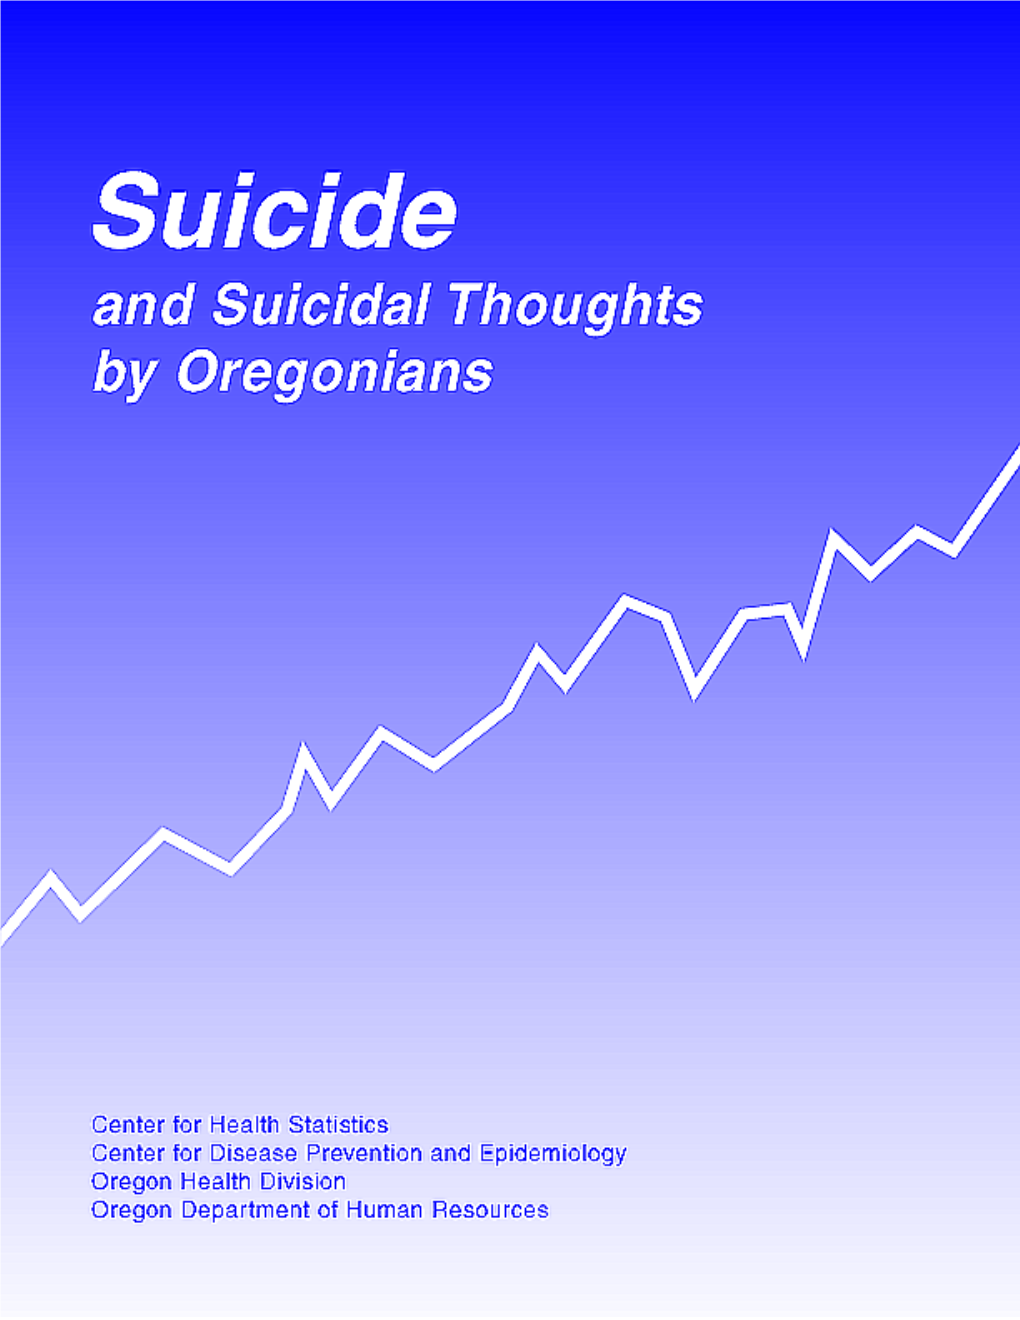 And Suicidal Thoughts by Oregonians